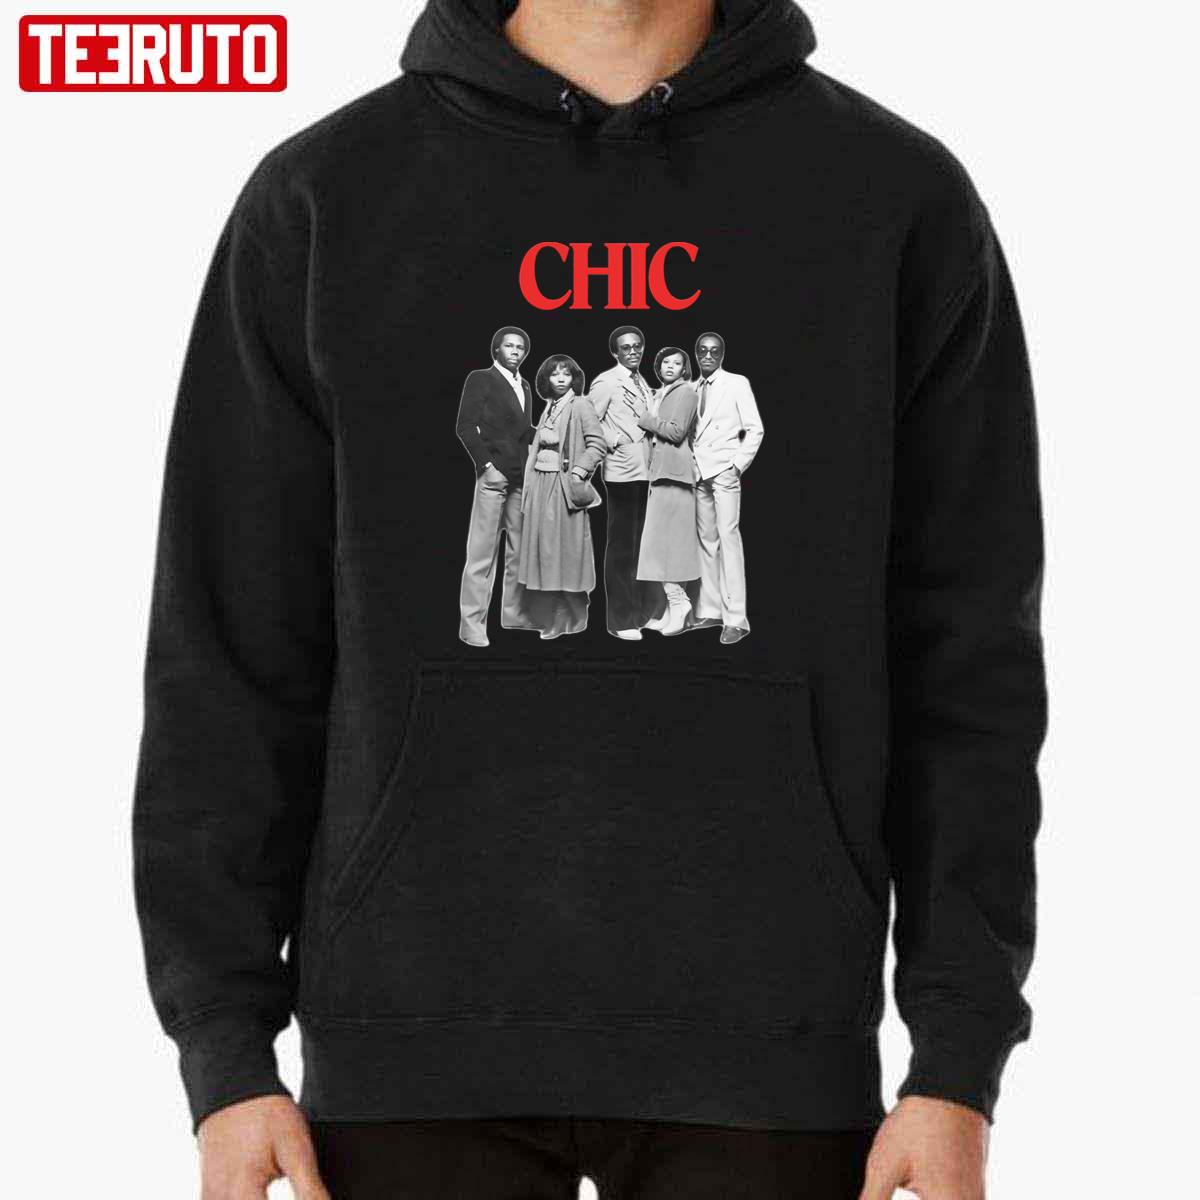 Chic Ft Nile Rodgers Formed In 1972 Unisex Sweatshirt